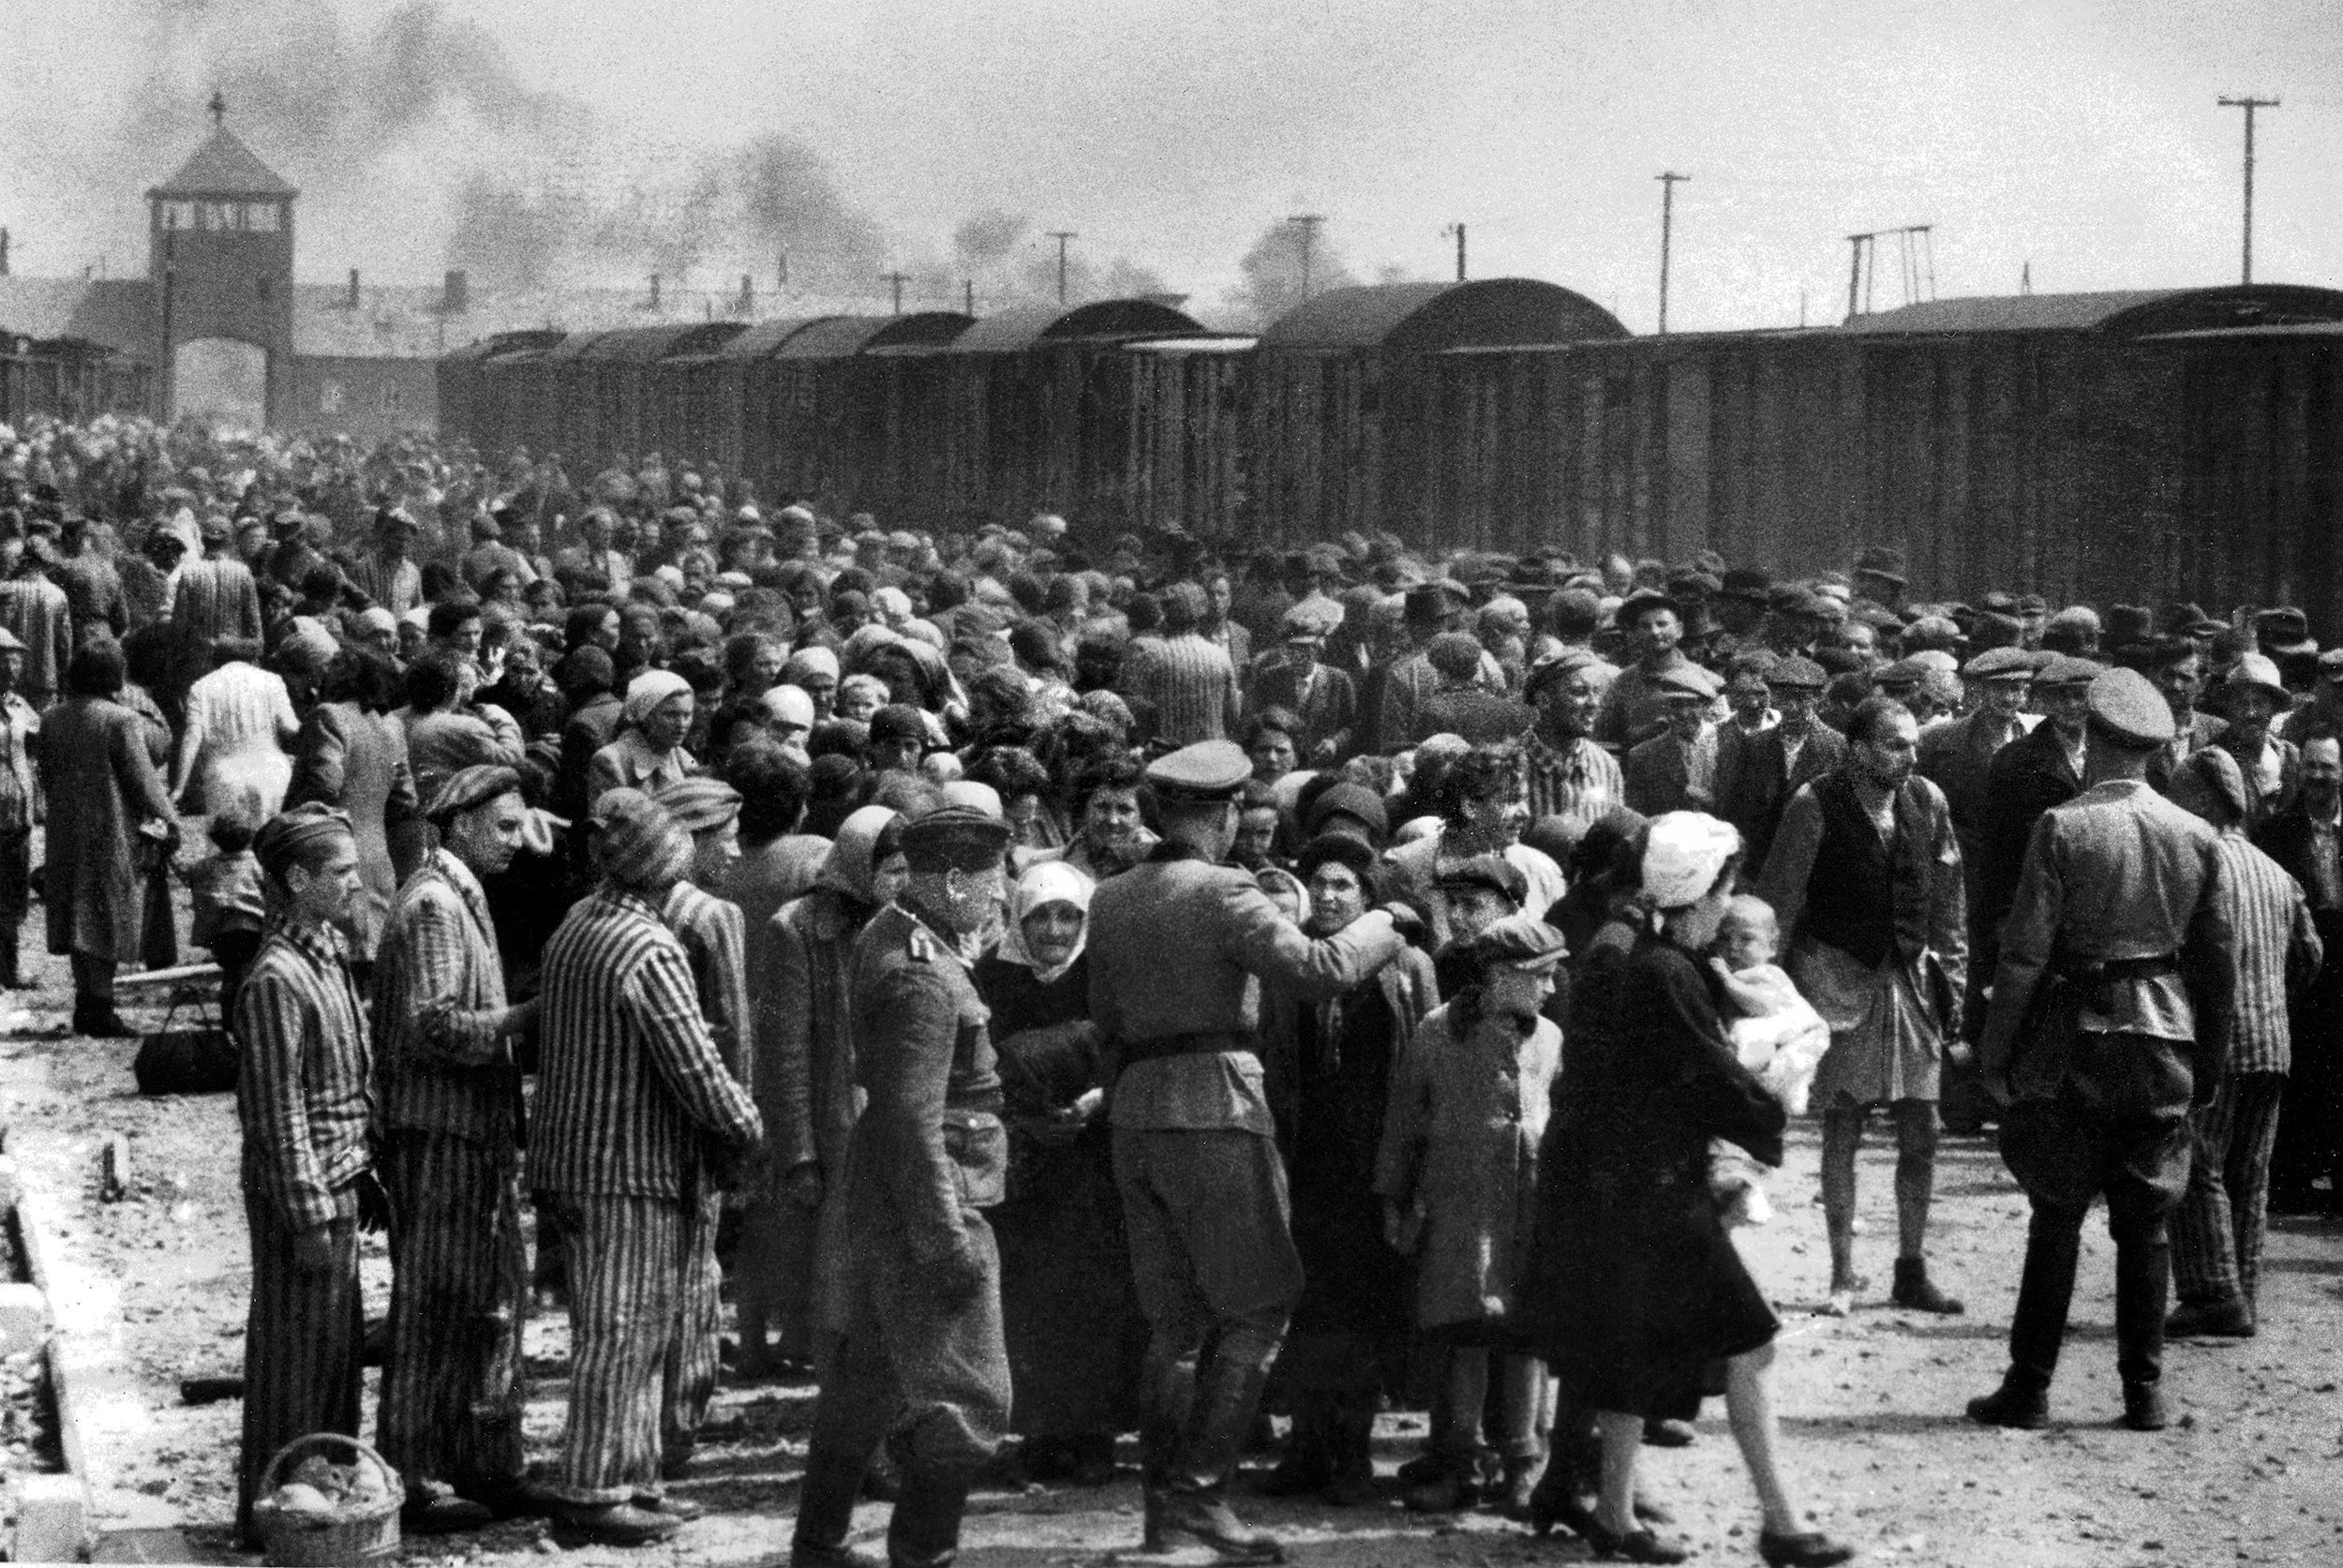 Prisoners being processed upon arrival at the Auschwitz-Birkenau death camp in Poland, May 1944, where a million Jews, including 70,000 from Greece, were gassed.  